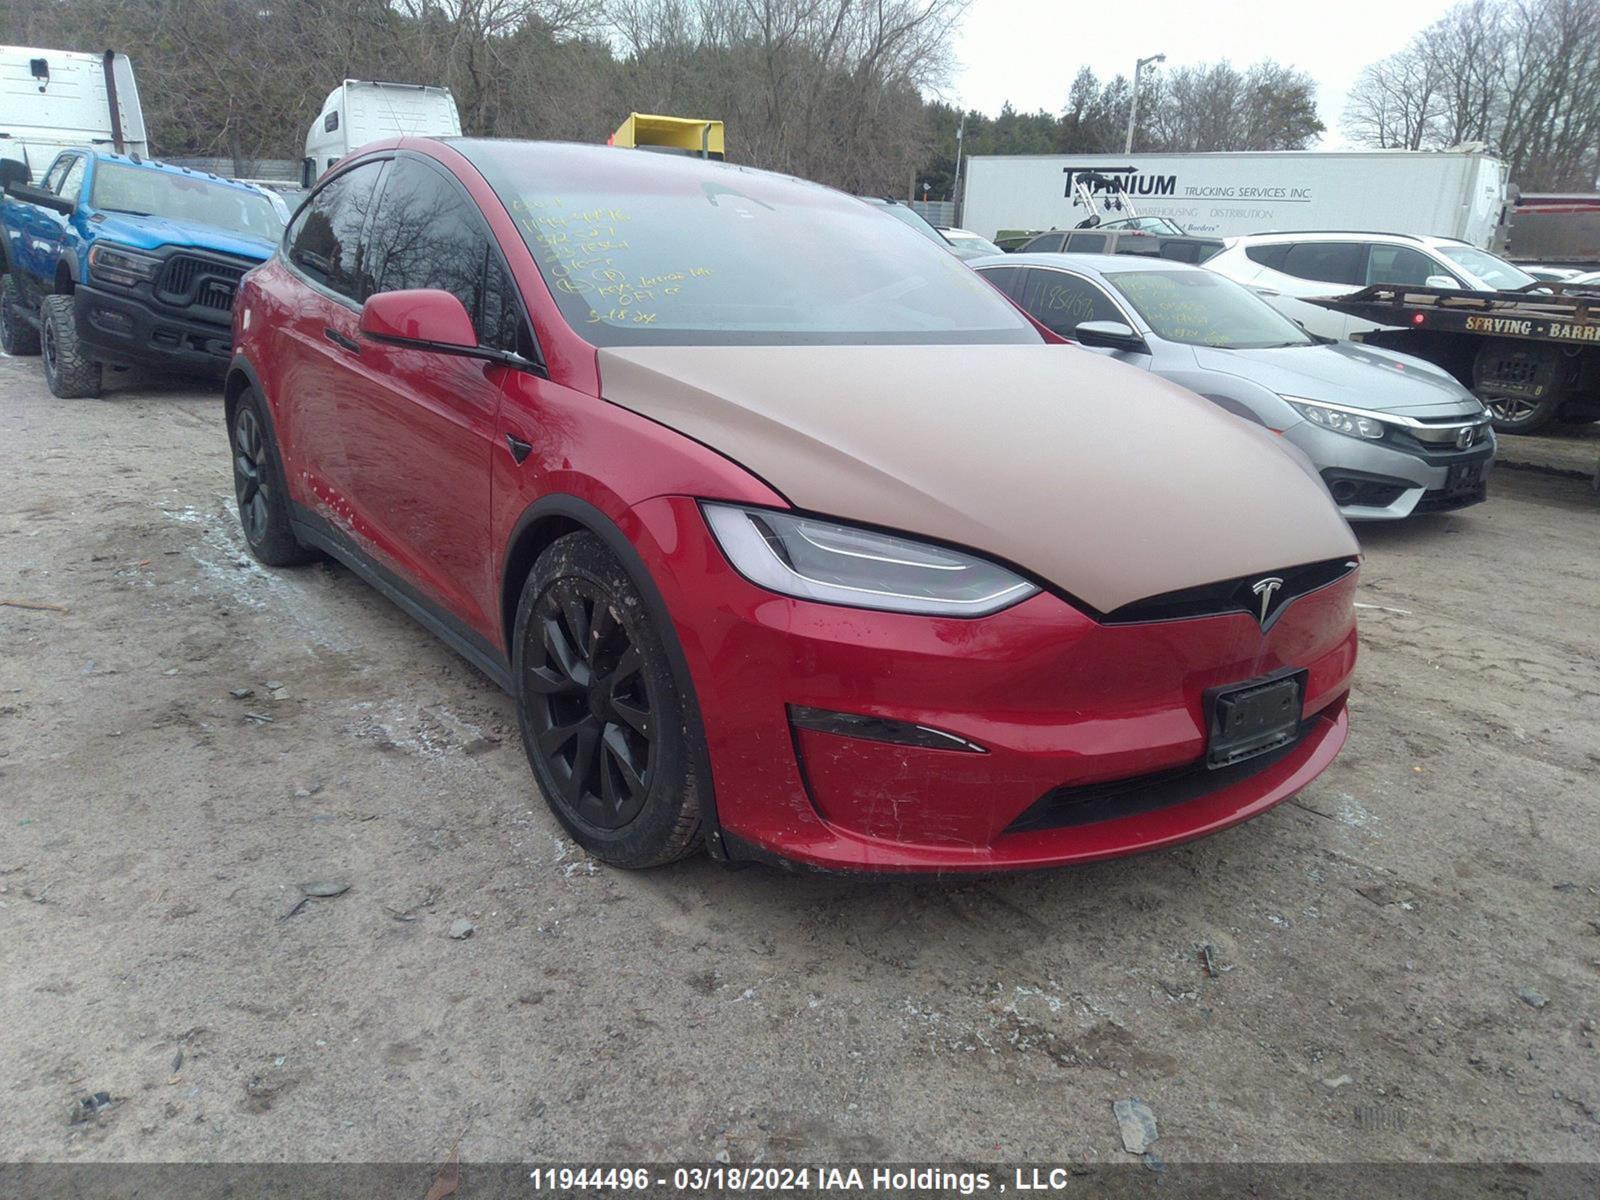 vin: 7SAXCDE51PF372527 7SAXCDE51PF372527 2023 tesla model x 0 for Sale in l4a7x4, 16505 Hwy 48 , Stouffville, Ontario, Canada